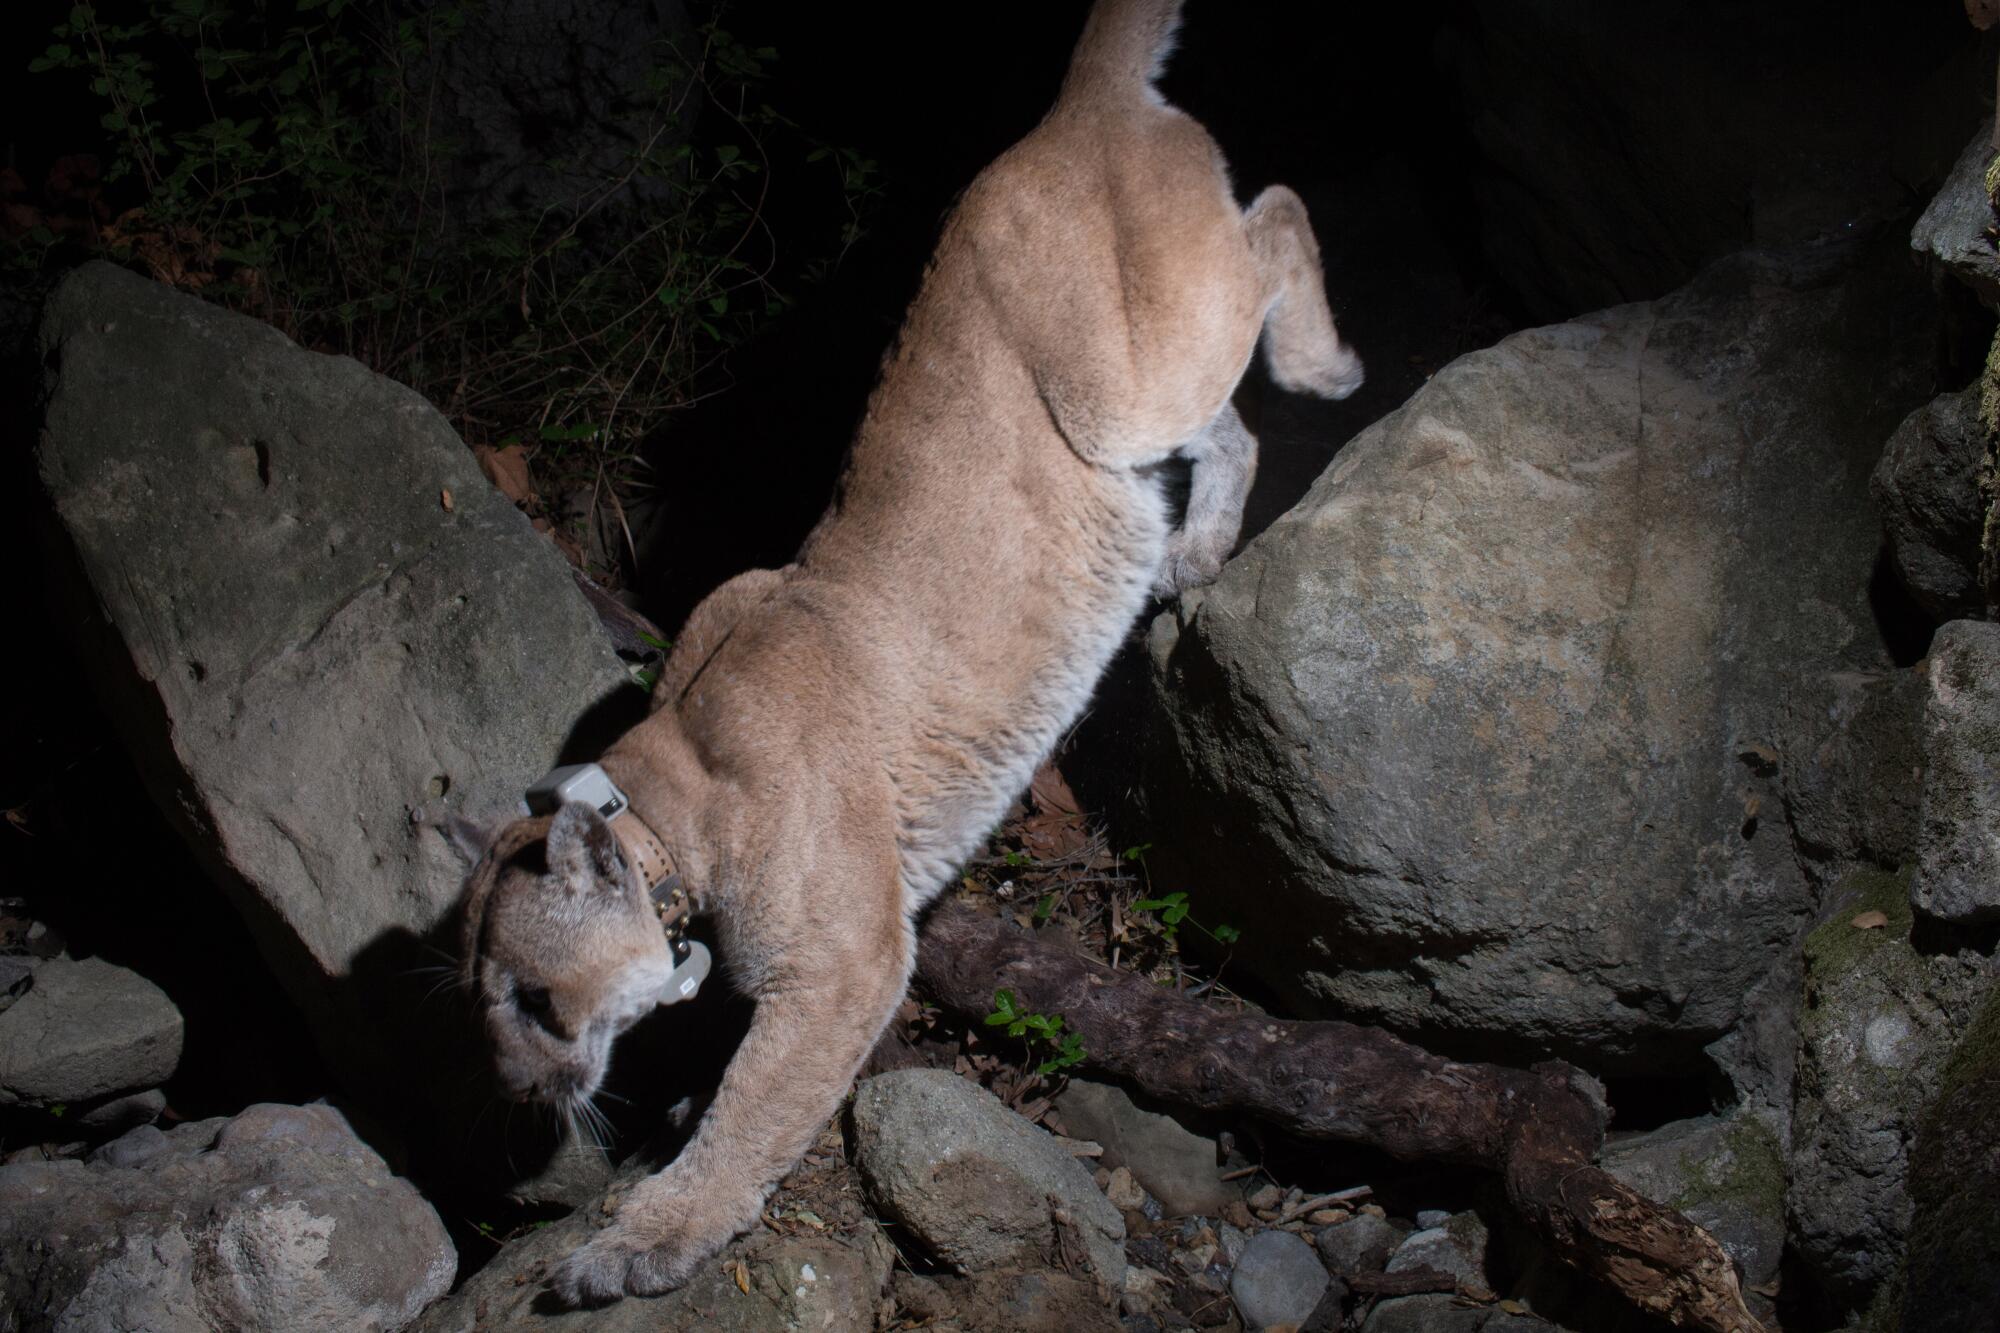 P-22 steps across rocks at night in Griffith Park.